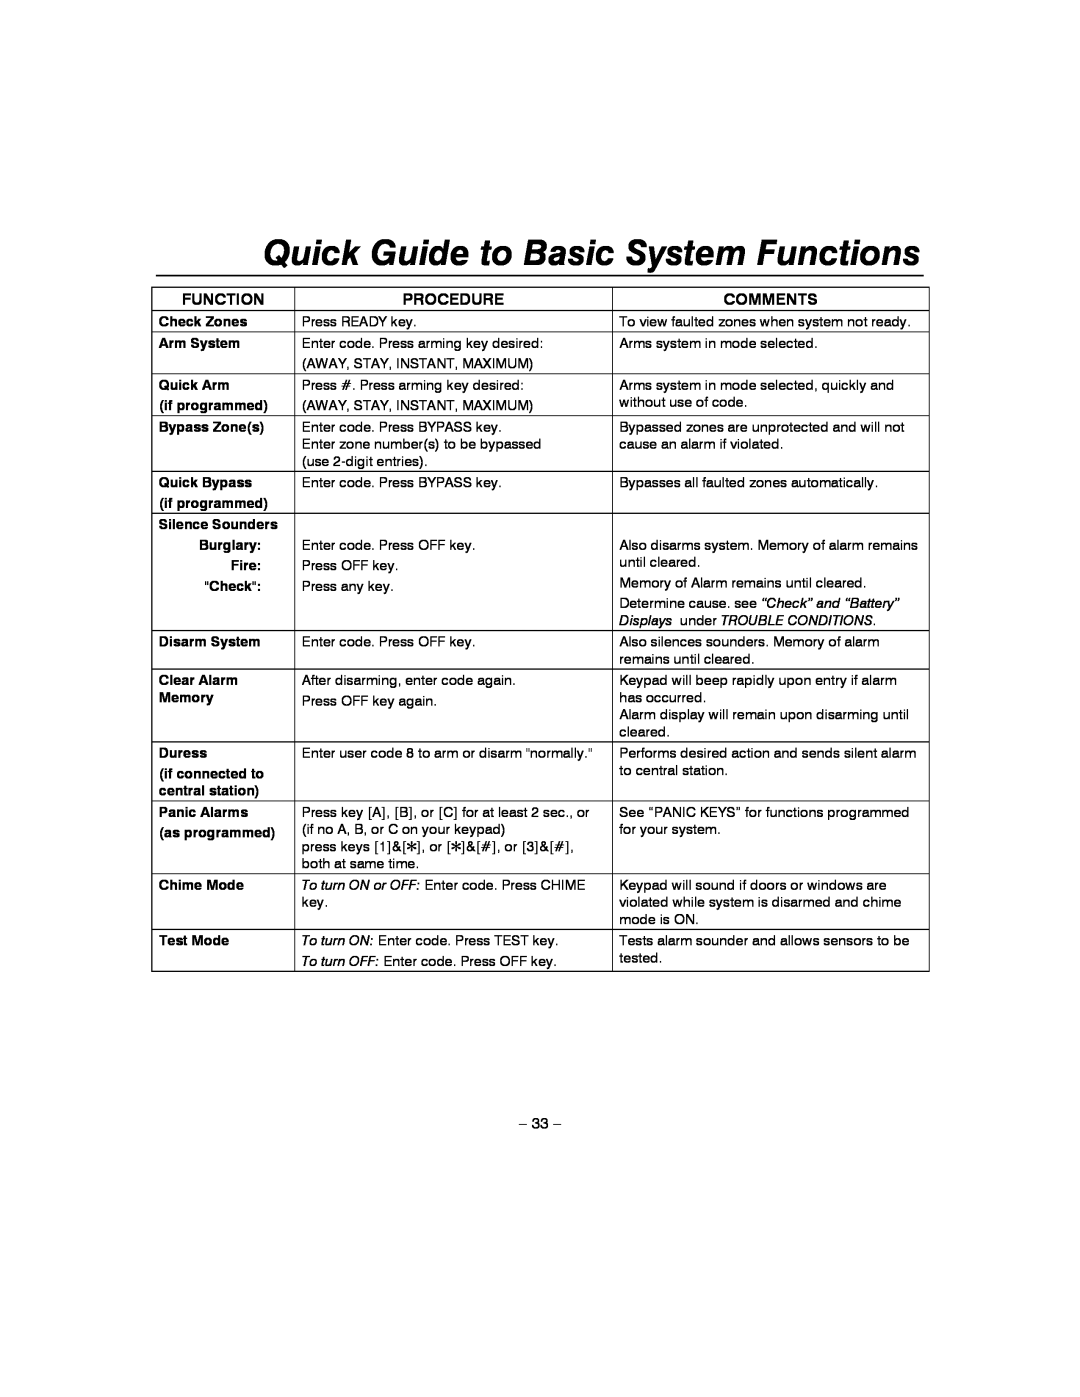 Honeywell 4110XM manual Quick Guide to Basic System Functions, Procedure, Comments 